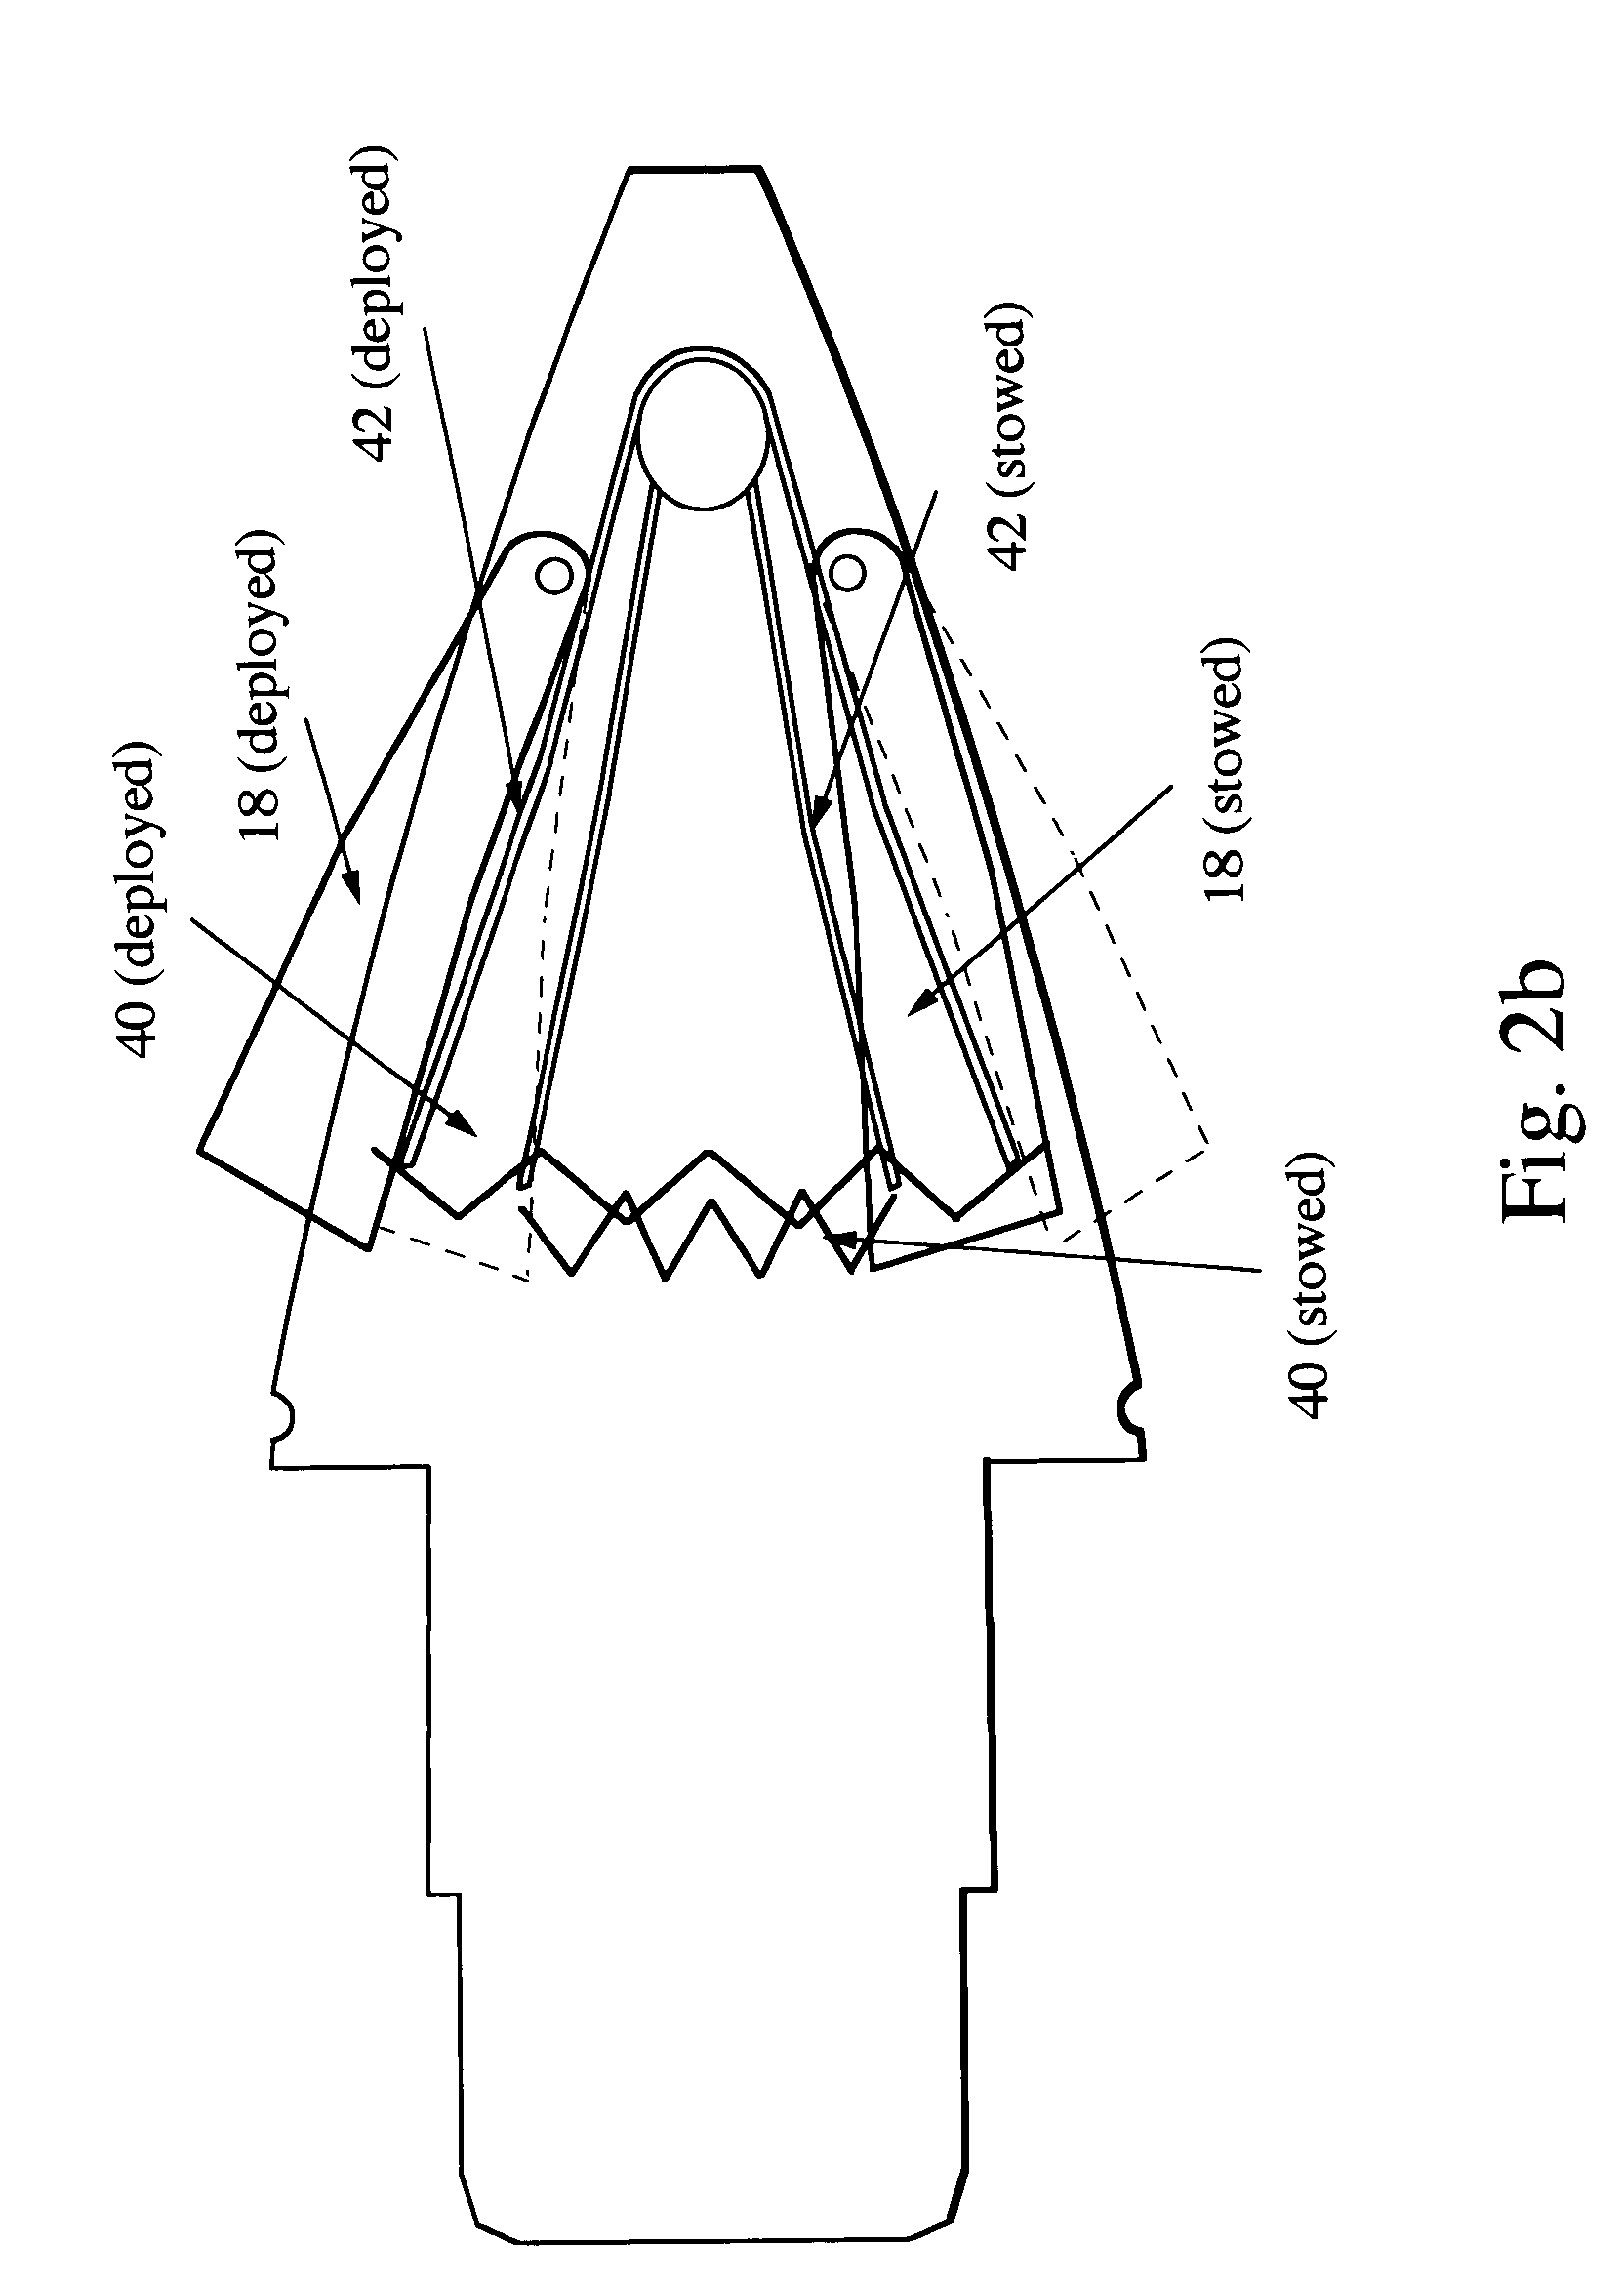 2-D projectile trajectory correction system and method